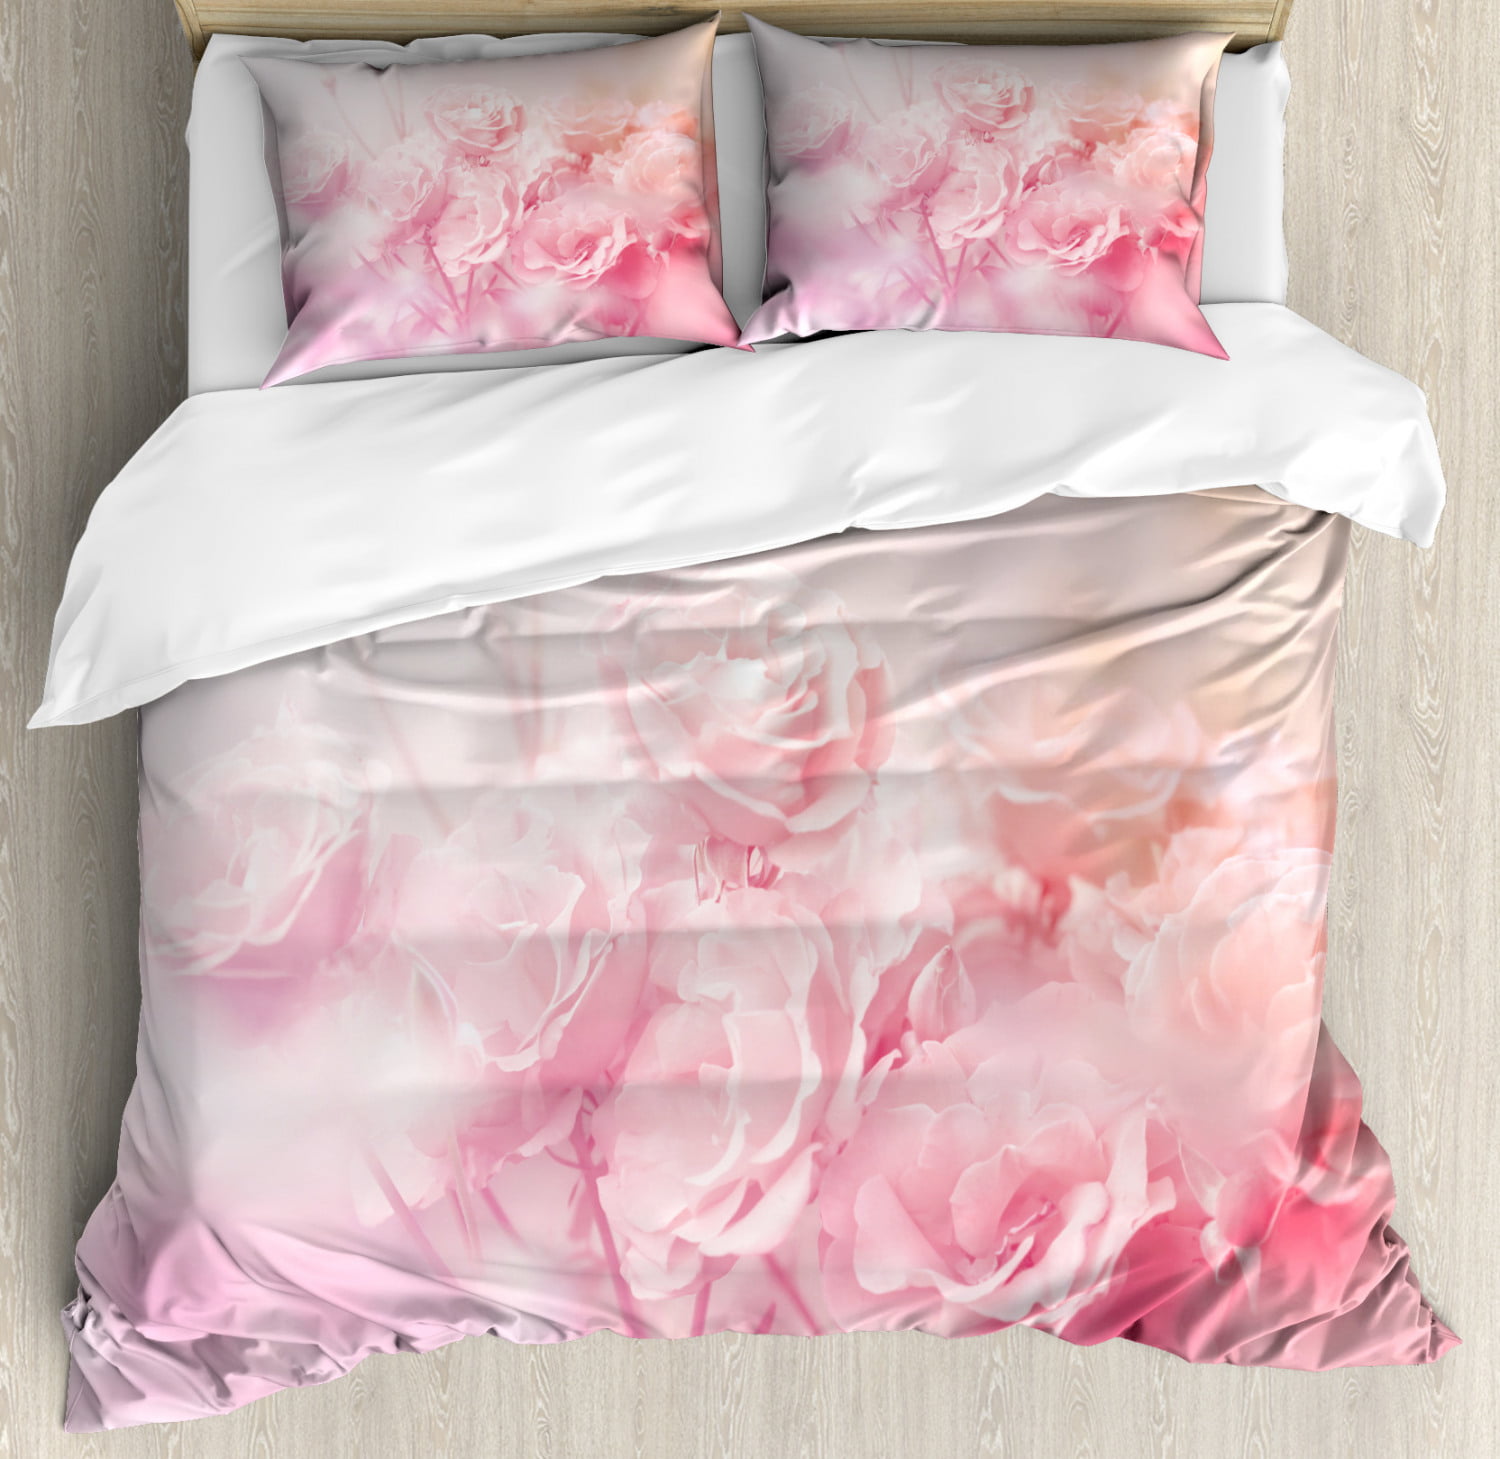 Double, Pink DOLCA CASA Embroidery Bed Spread With 2 Free Pillow Cases,Bed Throw 100% Cotton Feel